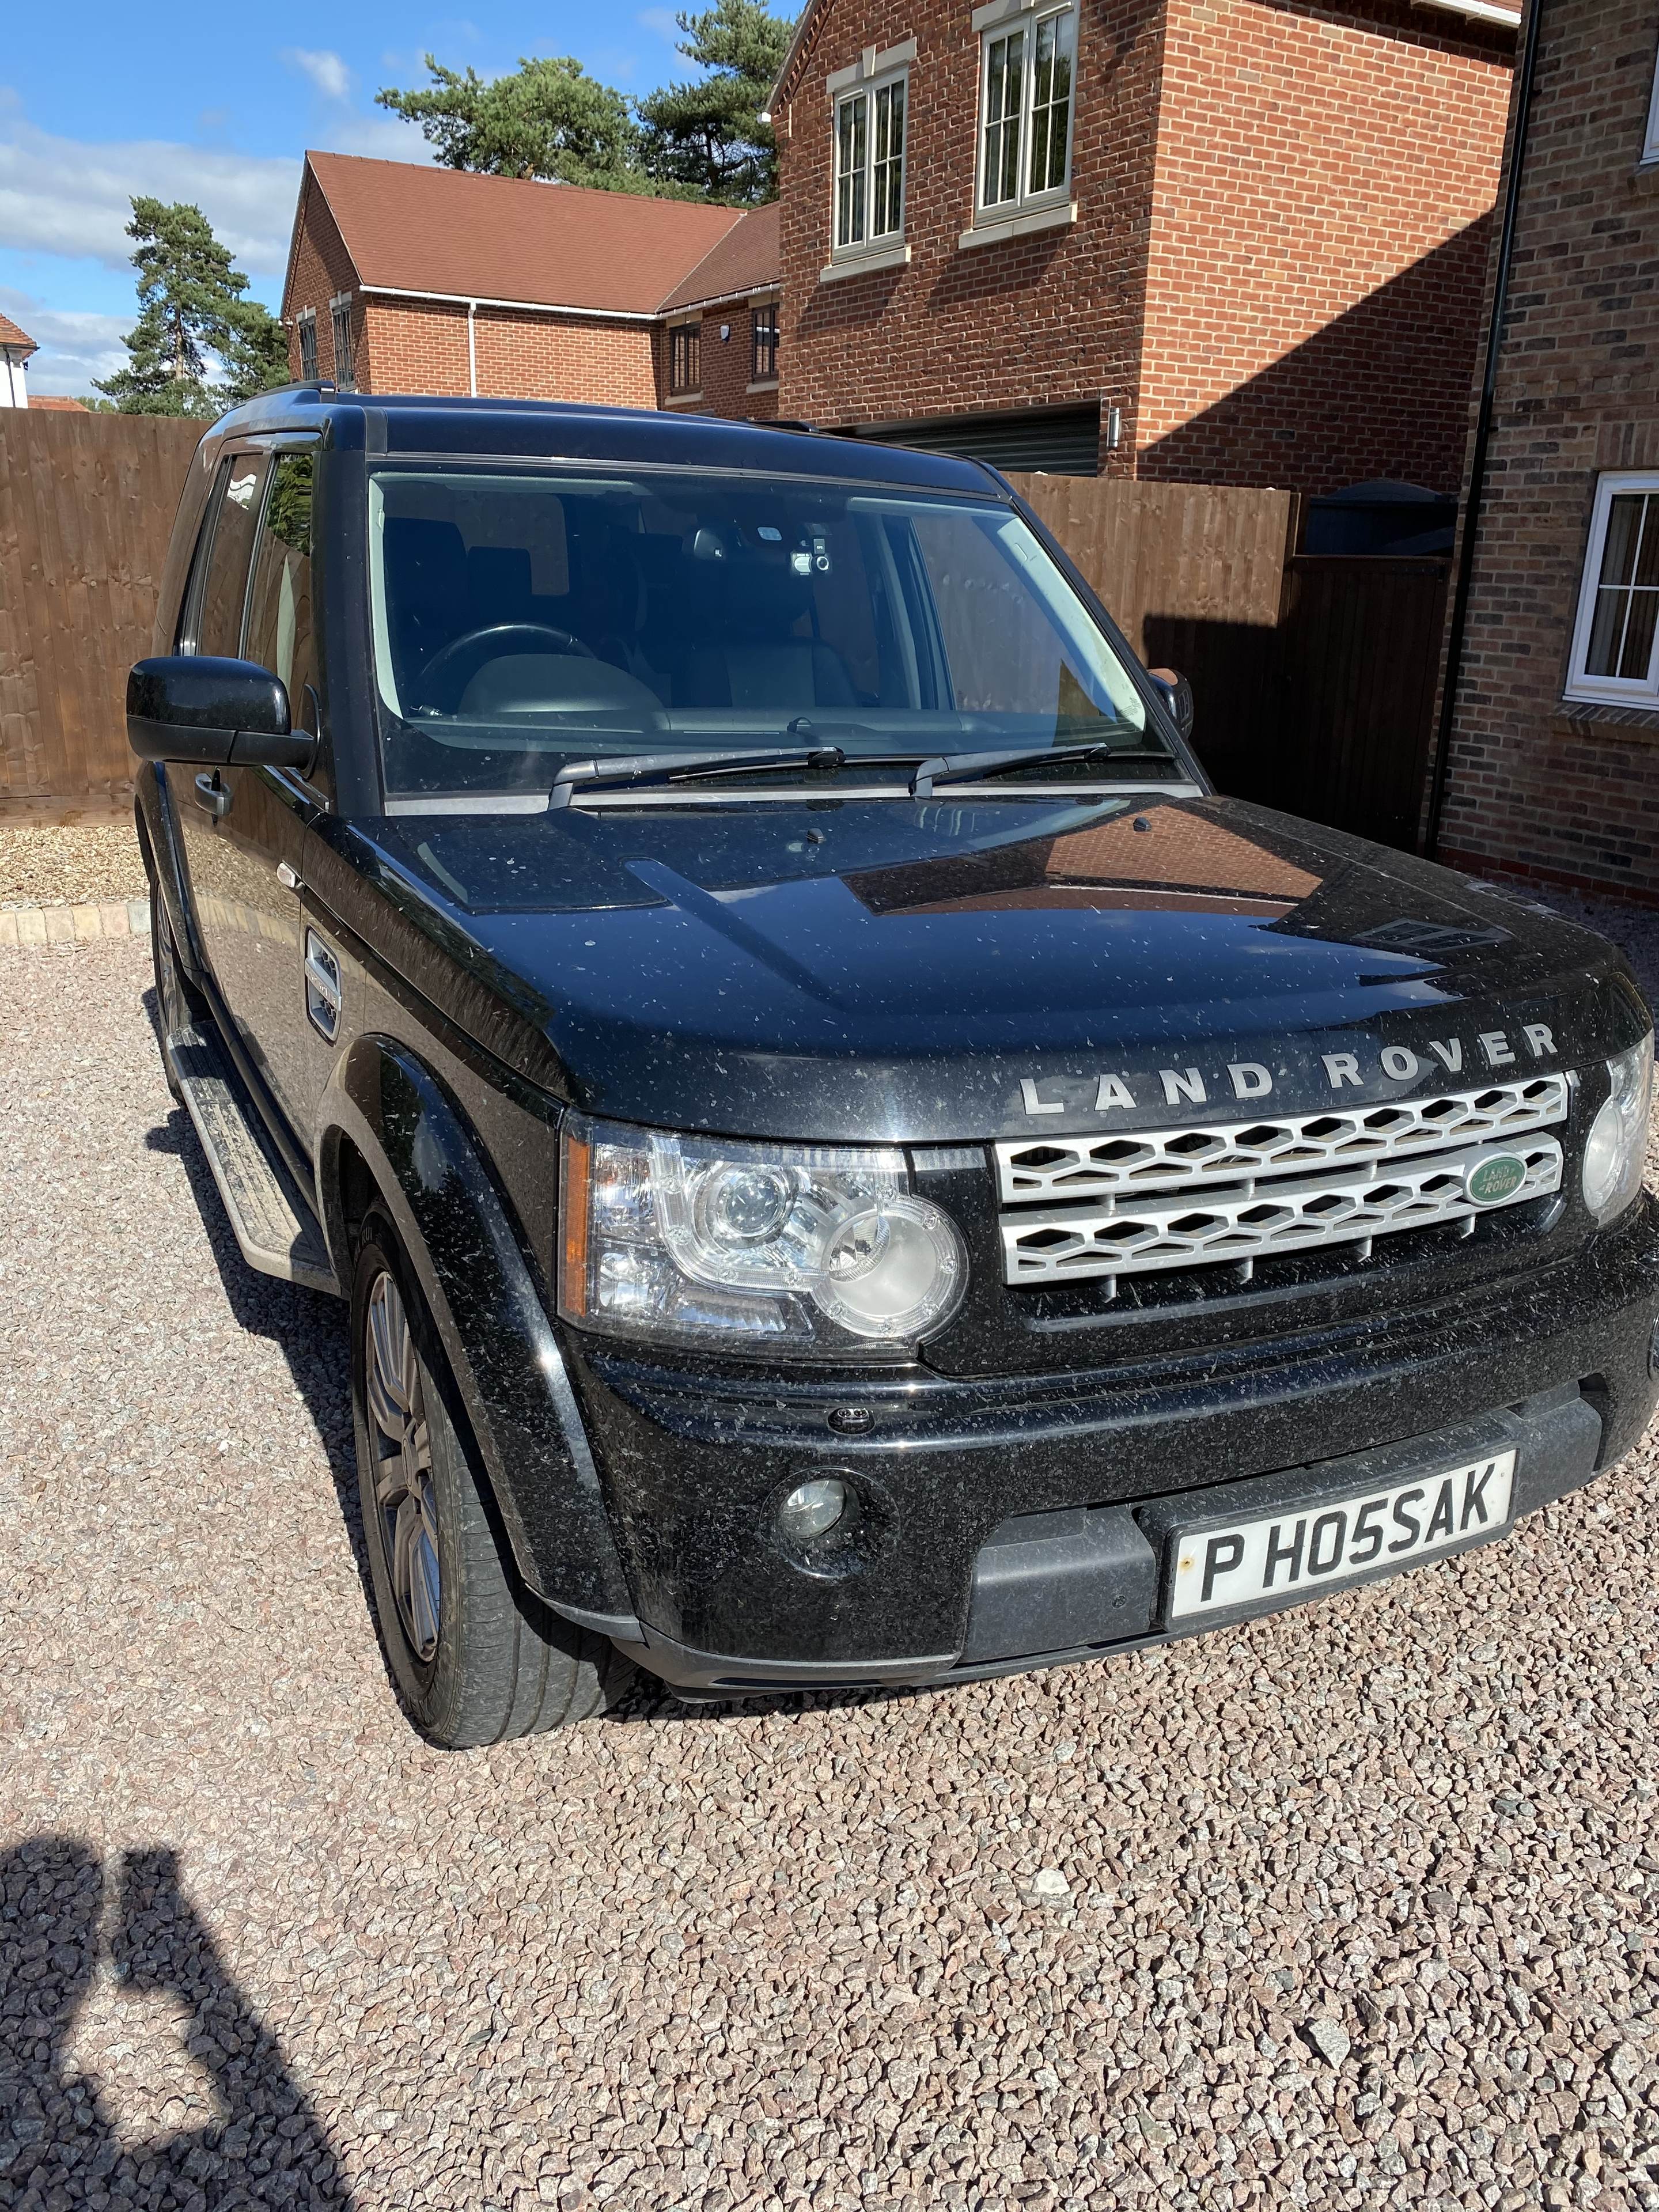 show us your land rover - Page 109 - Land Rover - PistonHeads